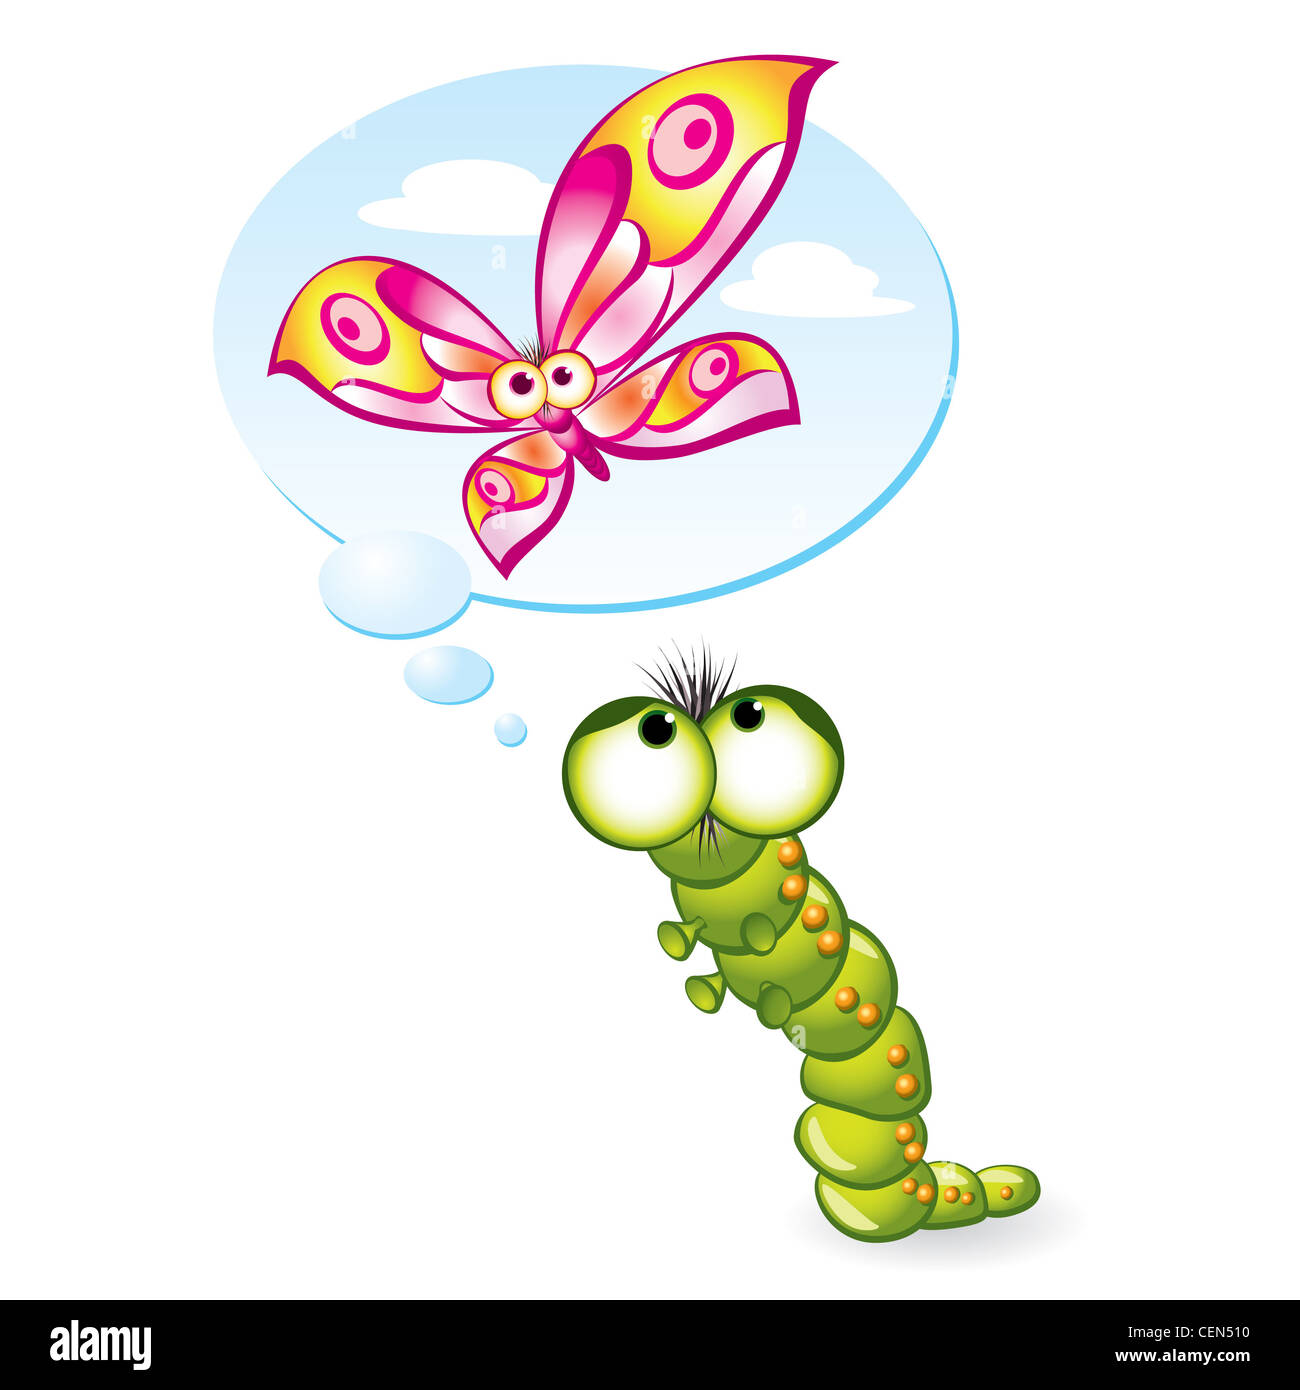 Caterpillar wants to become a butterfly. Illustration on white background Stock Photo